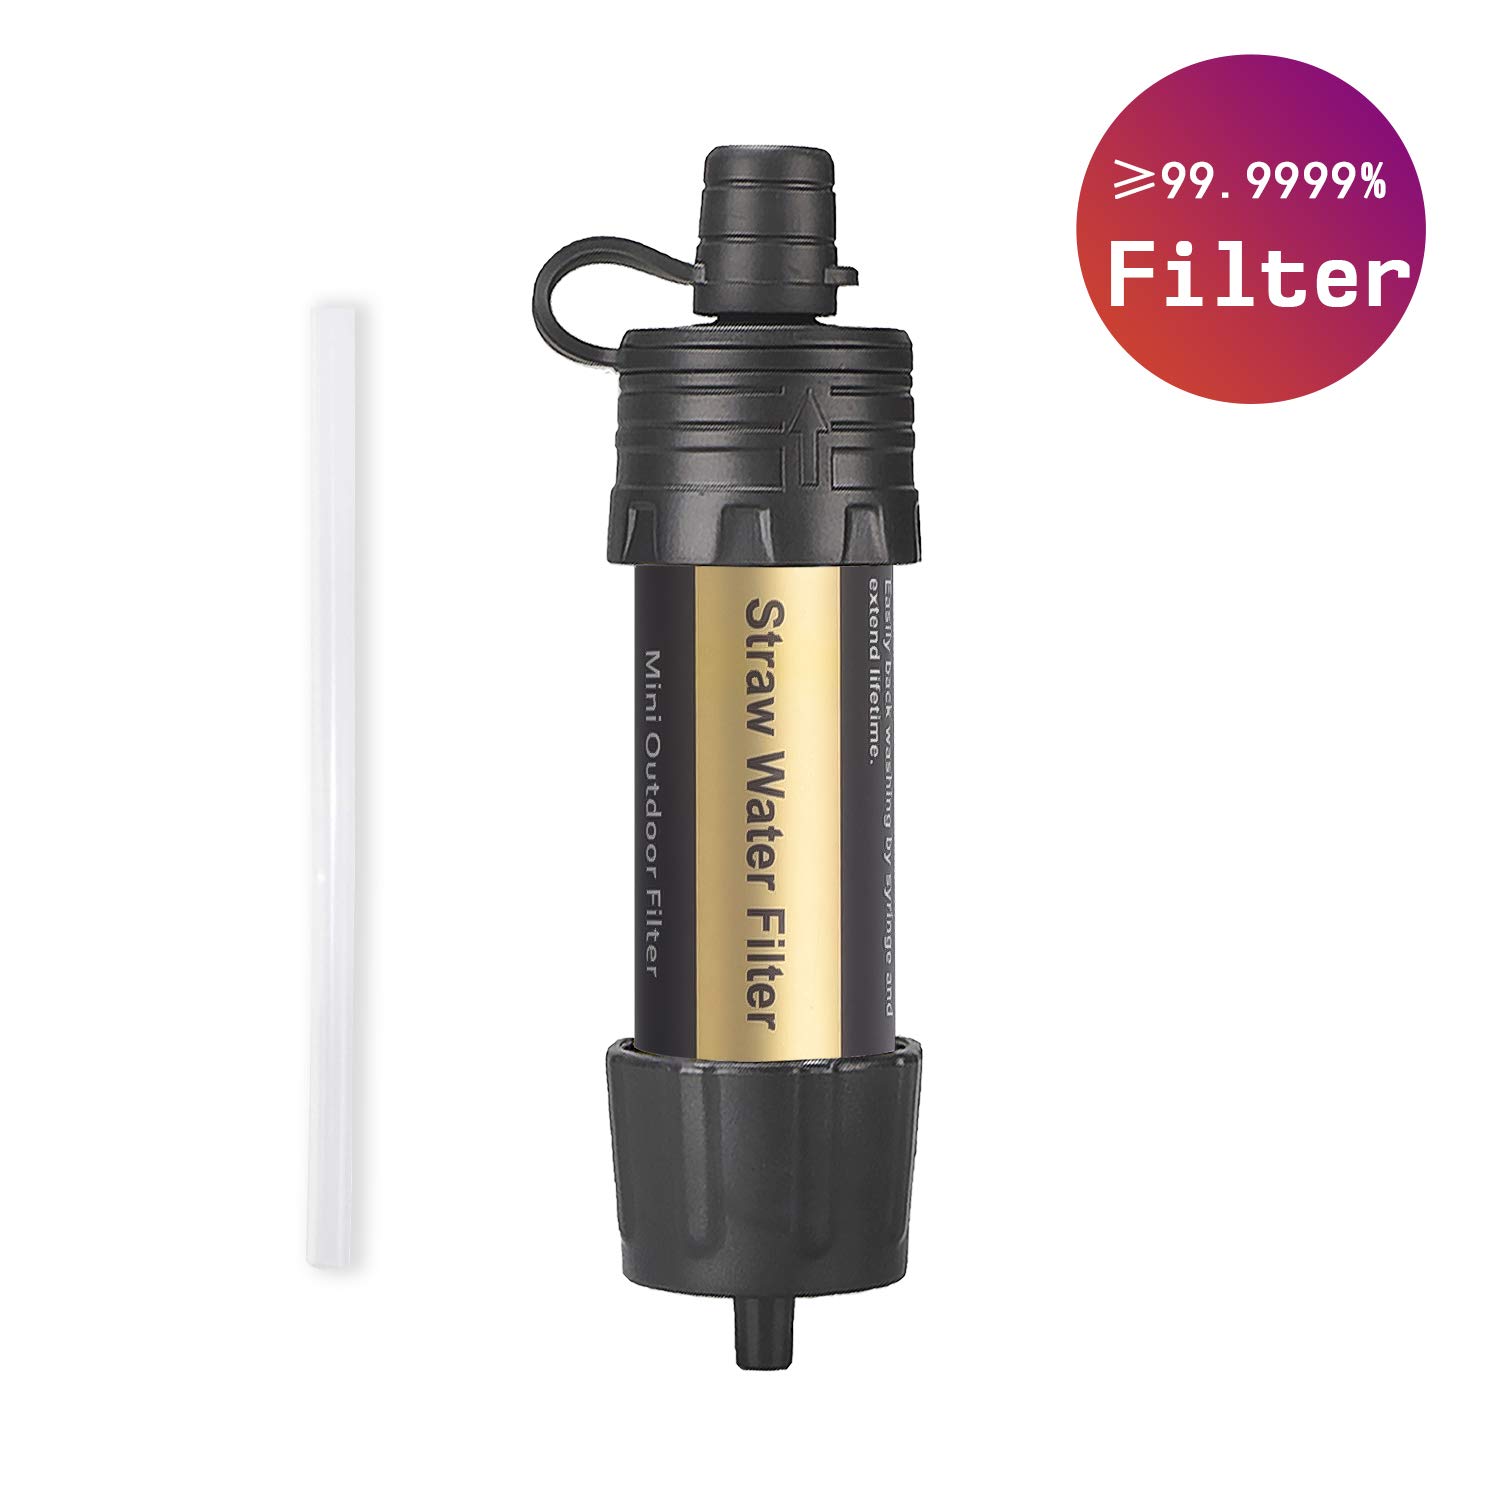 Easiestsuck Portable Mini Water Filter Straw 0.01 Micron,Emergency Water Filtration System for Camping Hiking and Backpacking 